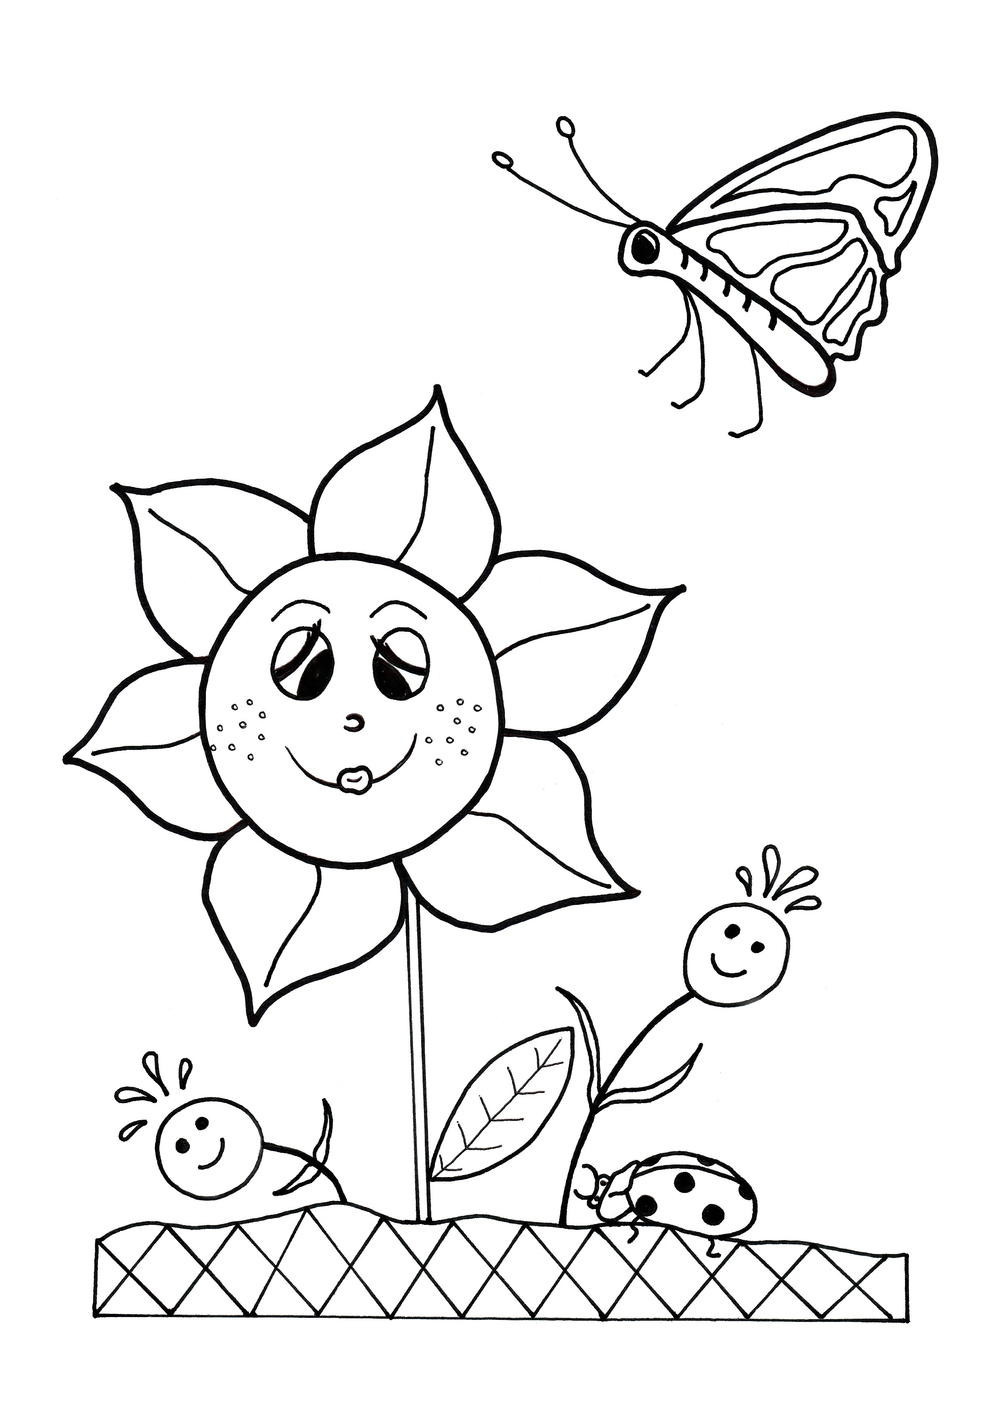 Printable Coloring Pages For Children
 Dancing Flowers Spring Coloring Sheet